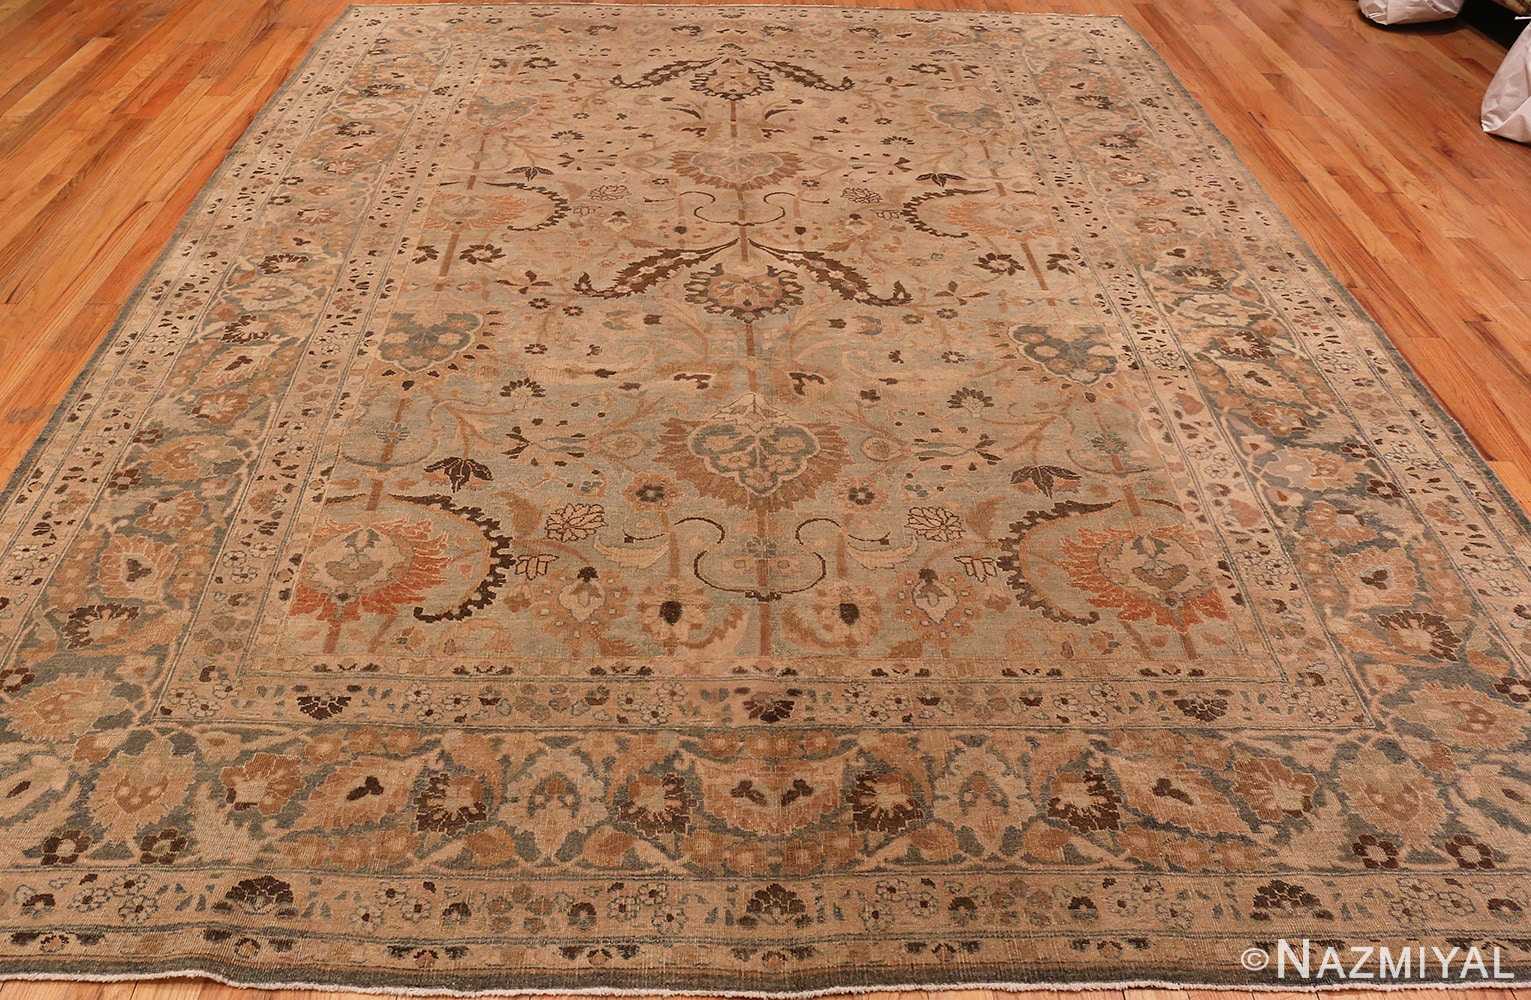 Full Picture of Antique Persian Khorassan Rug #49631 from Nazmiyal Antique Rugs in NYC